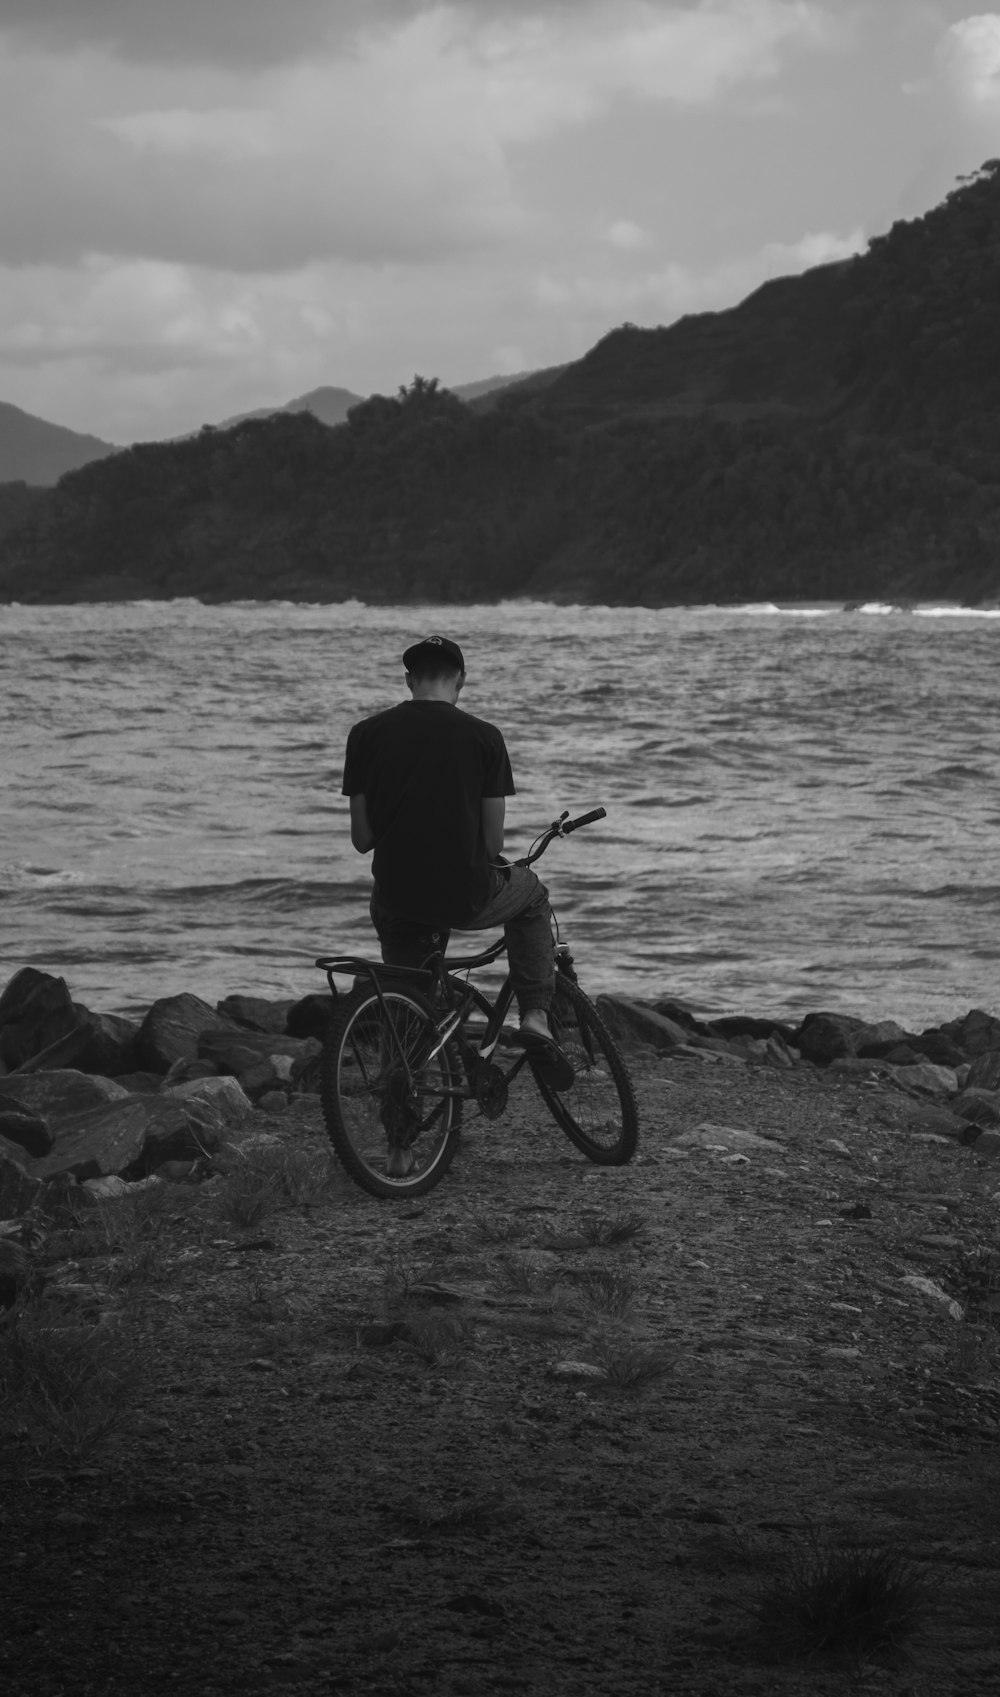 a man riding a bicycle on a beach